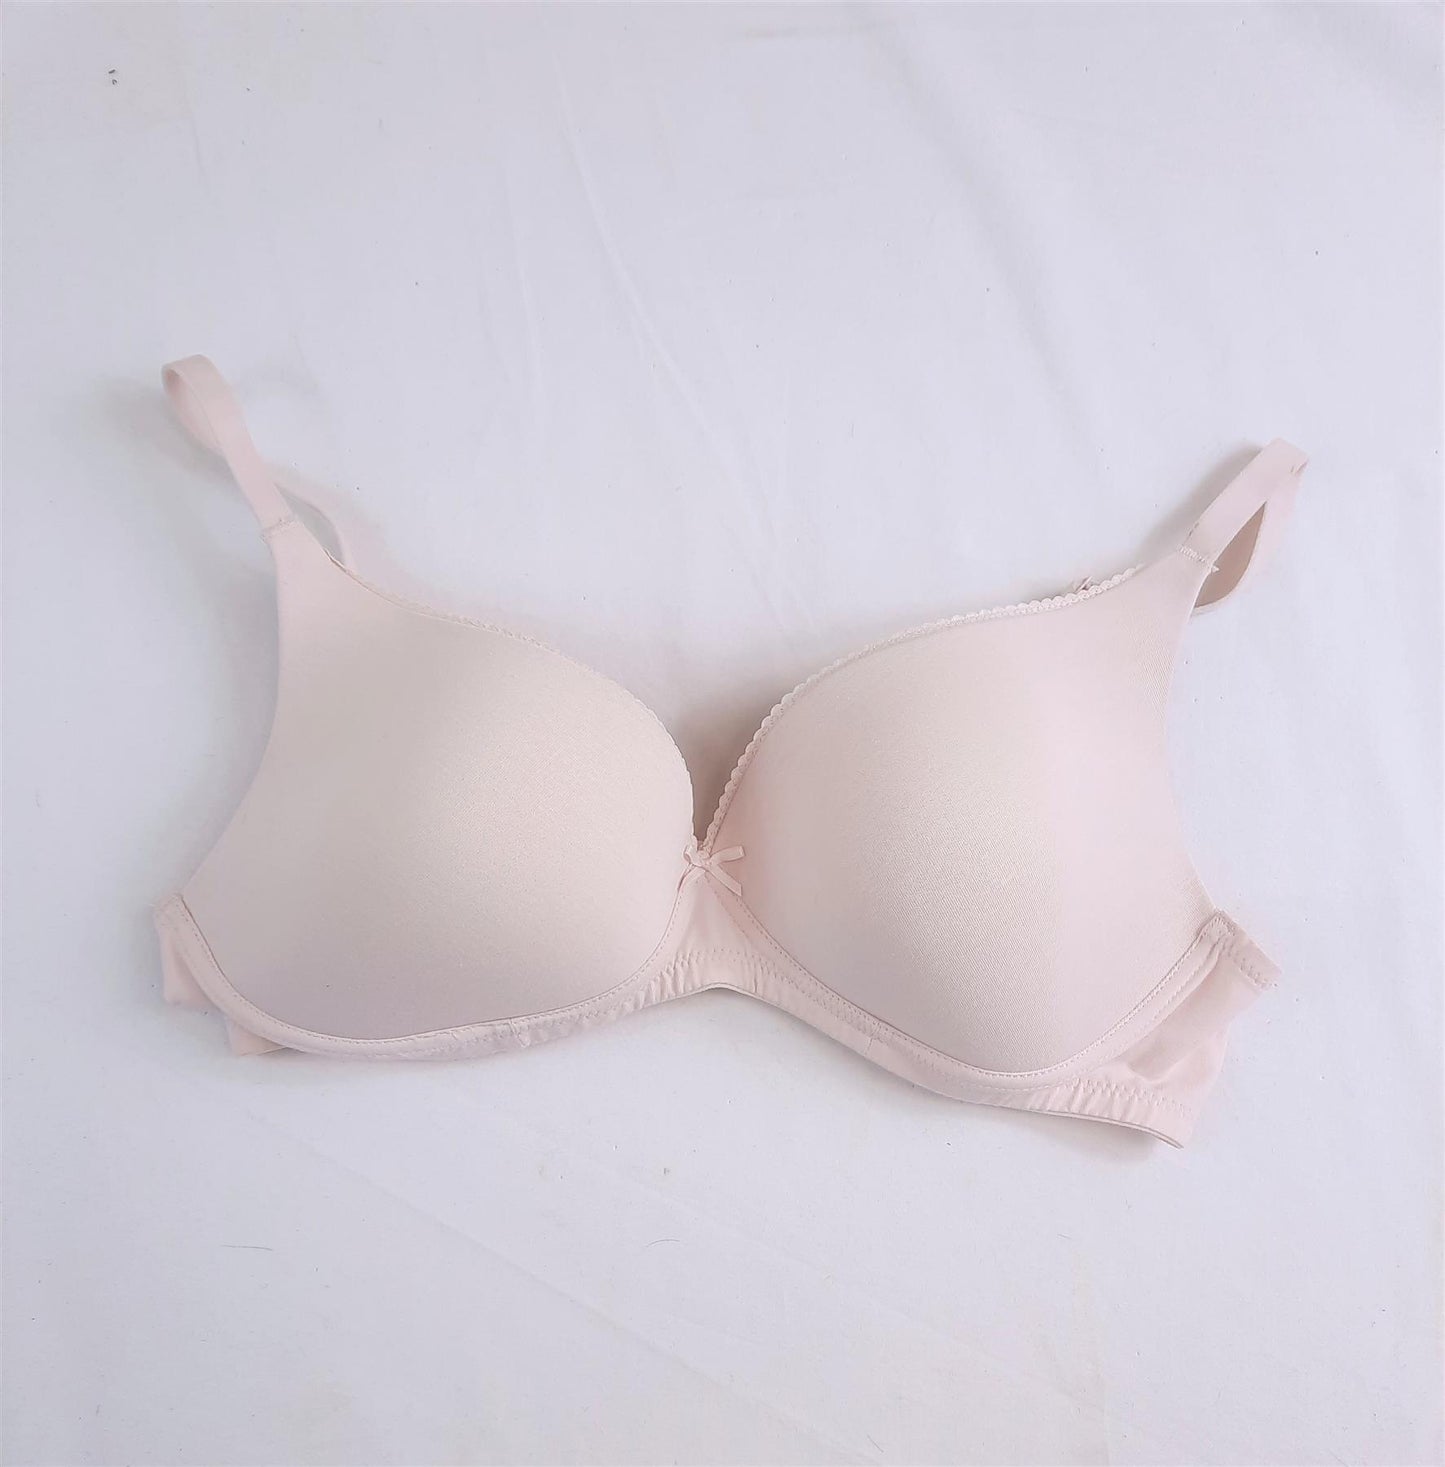 M S Cotton-Rich Lounge Bra Non-Wired Lightly-Padded Soft Comfort Brand New